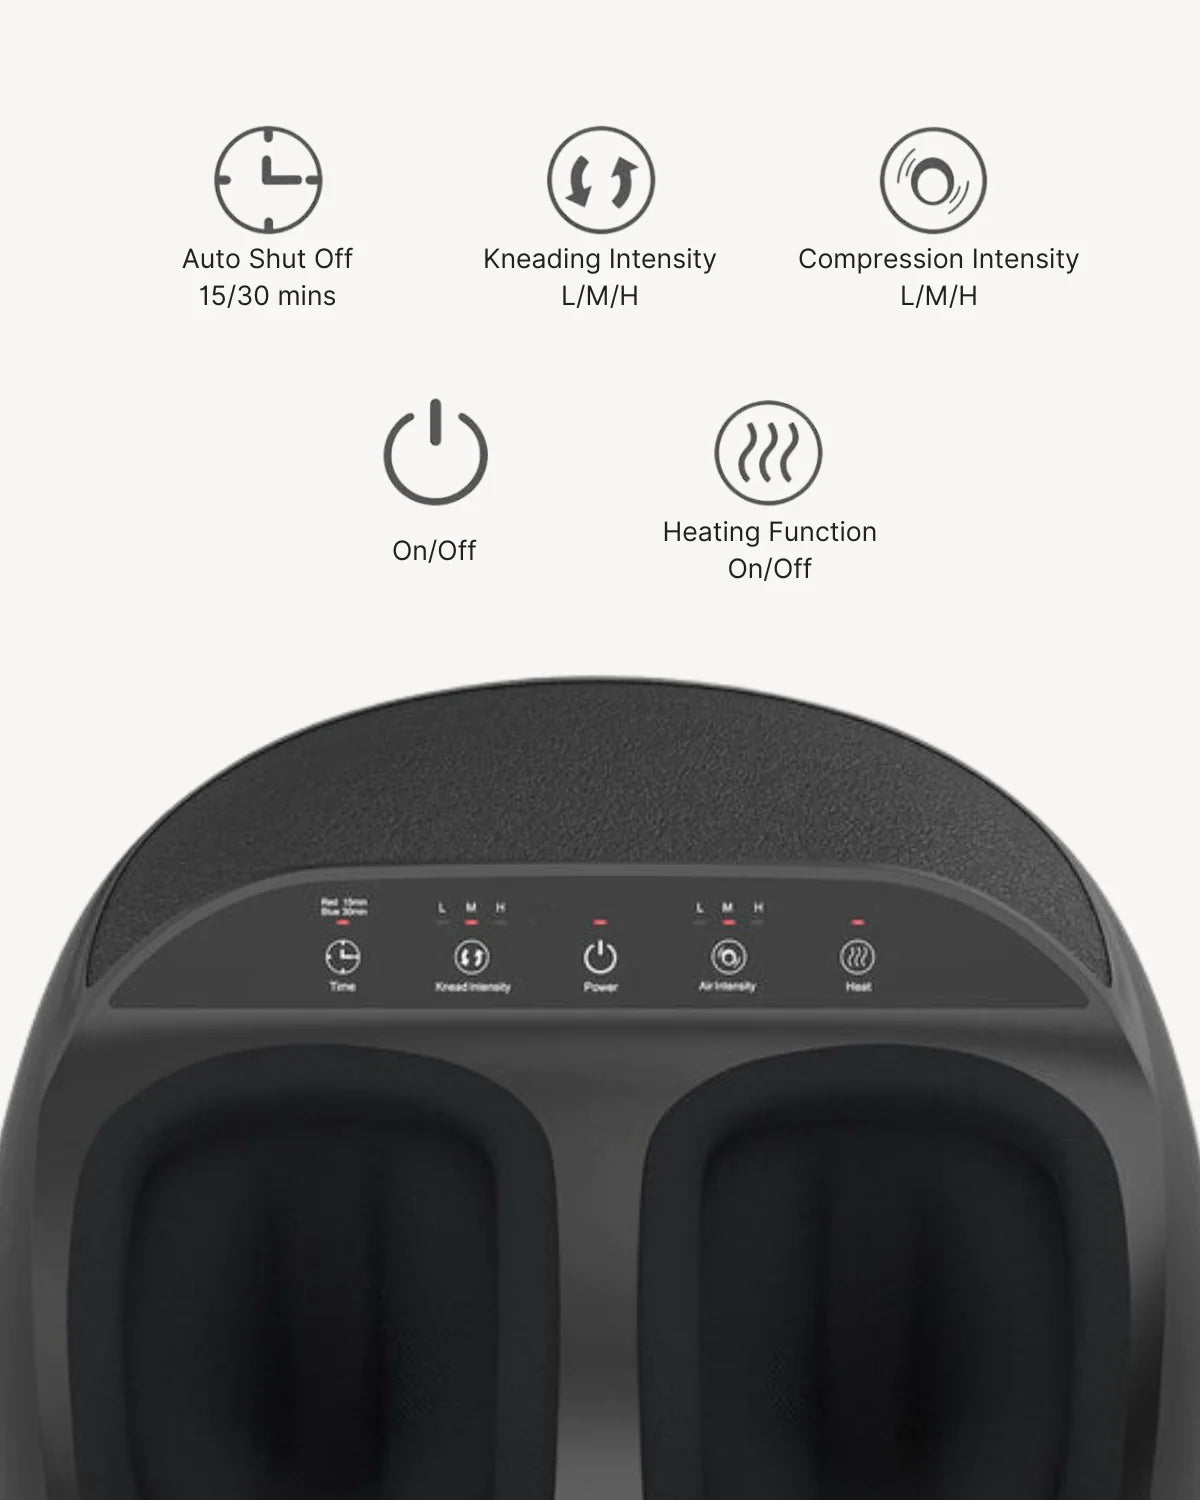 Close-up of a Renpho EU Shiatsu Foot Massager Premium control panel featuring buttons for auto shut-off timing, kneading intensity, compression intensity, power, and heating function, with corresponding icons above each control.